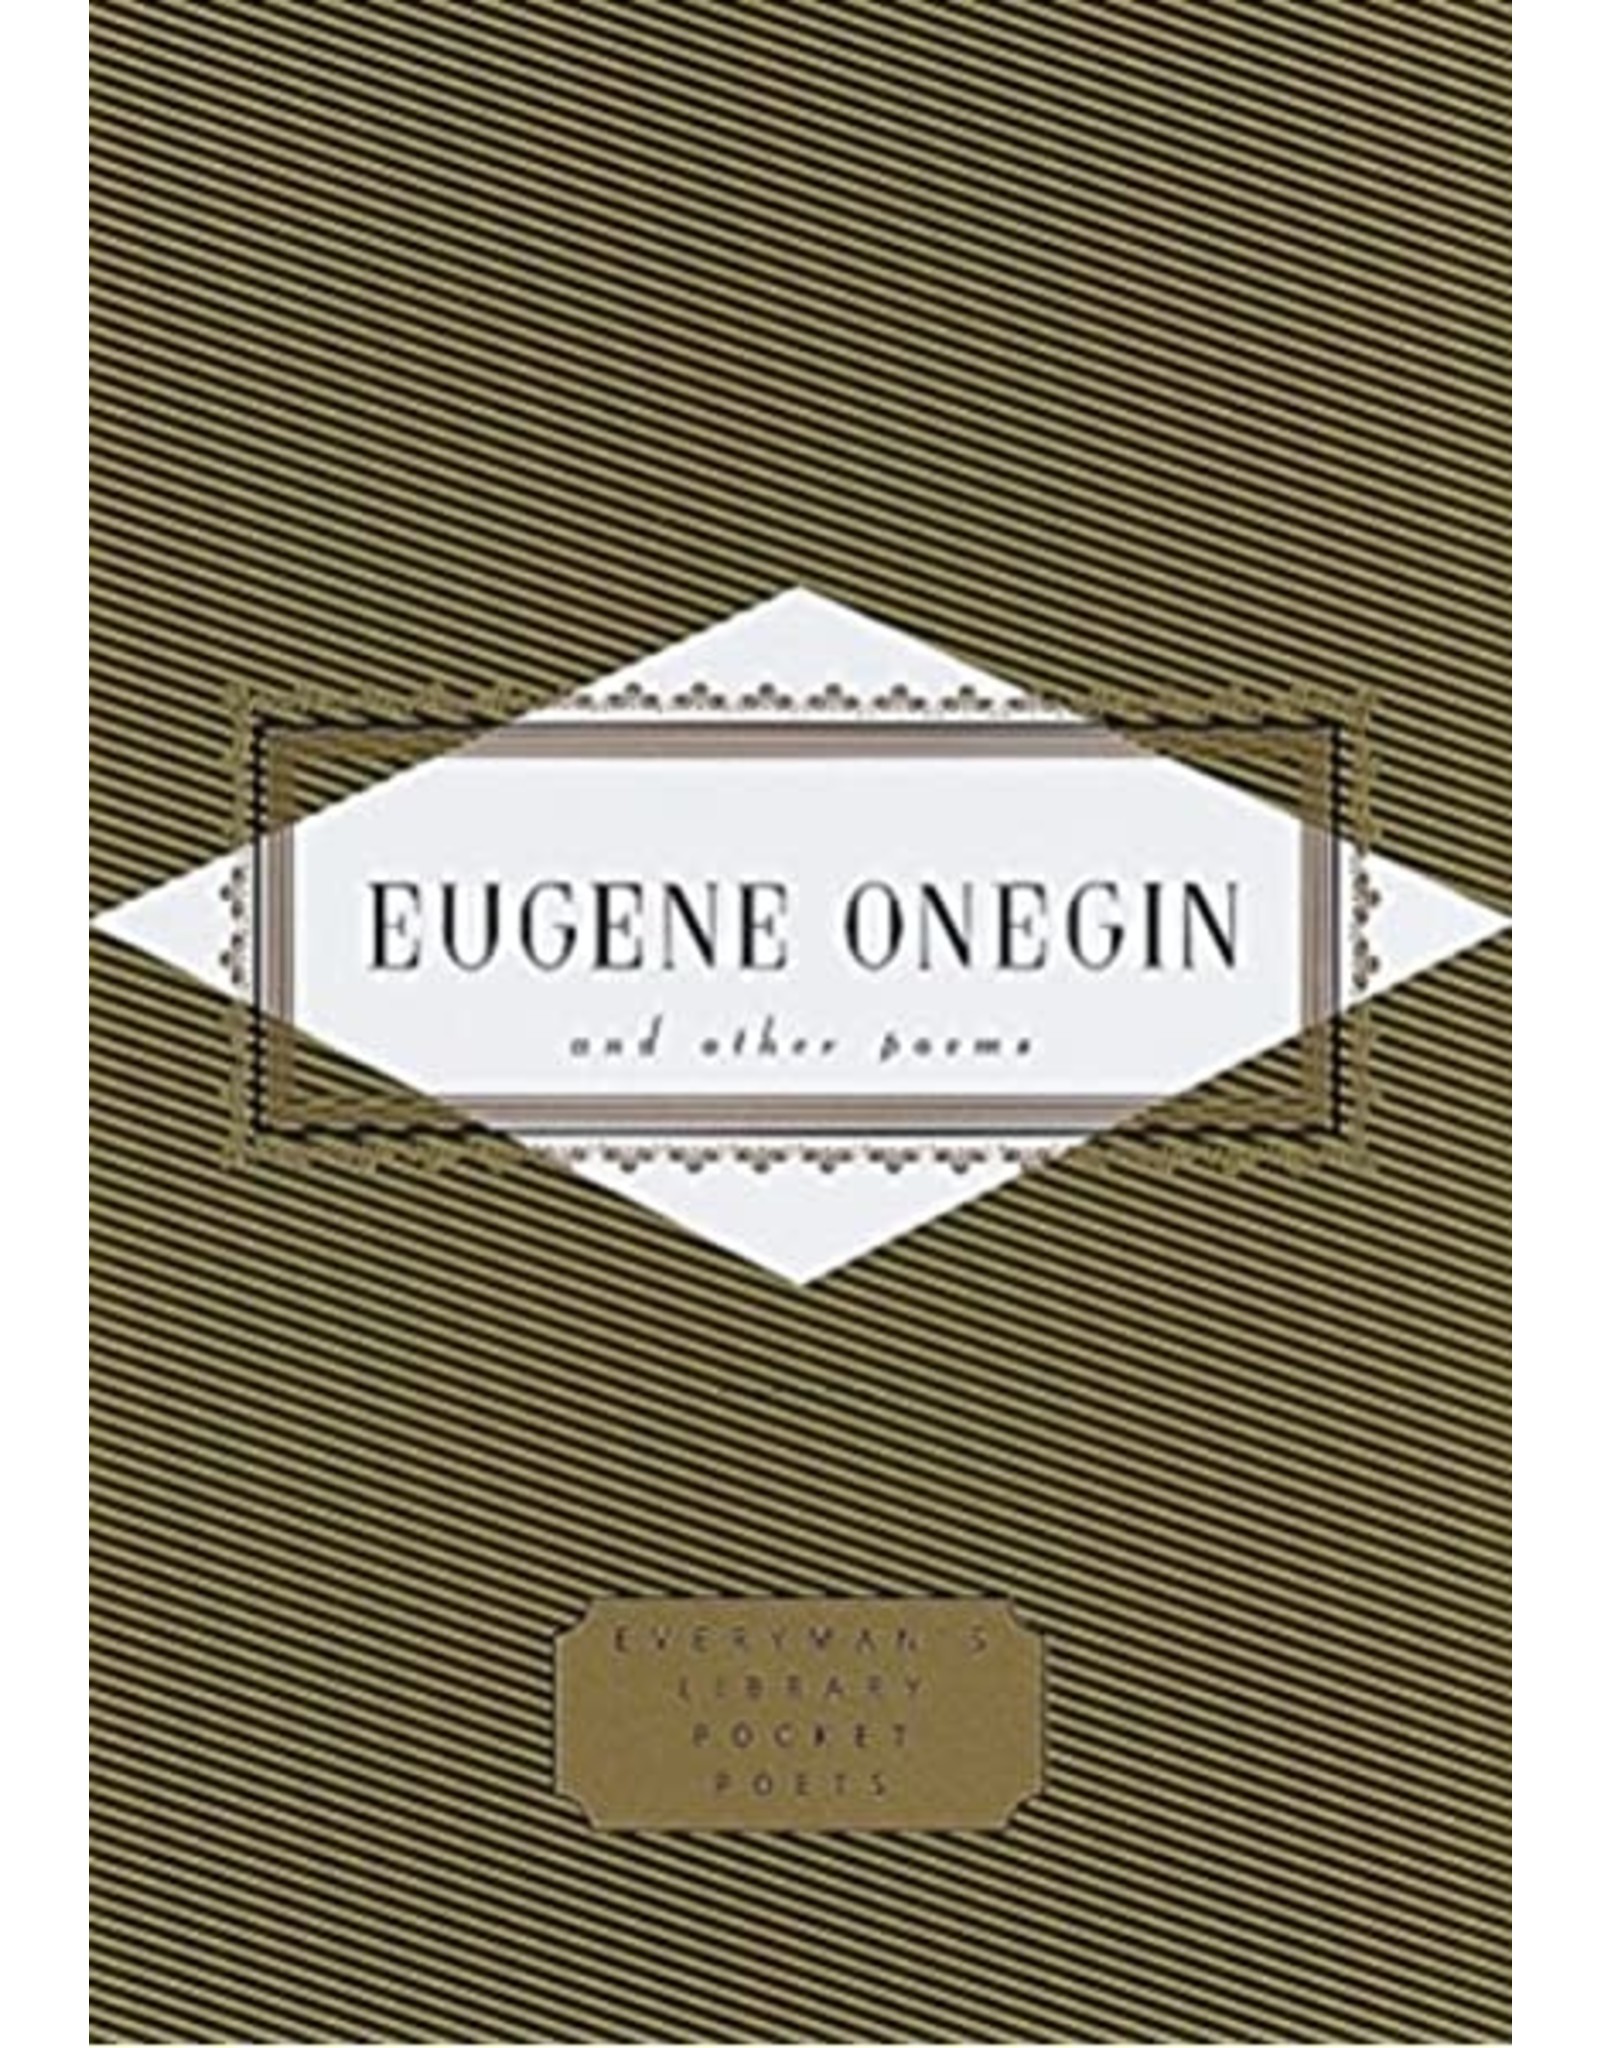 Eugene Onegin and Other Poems